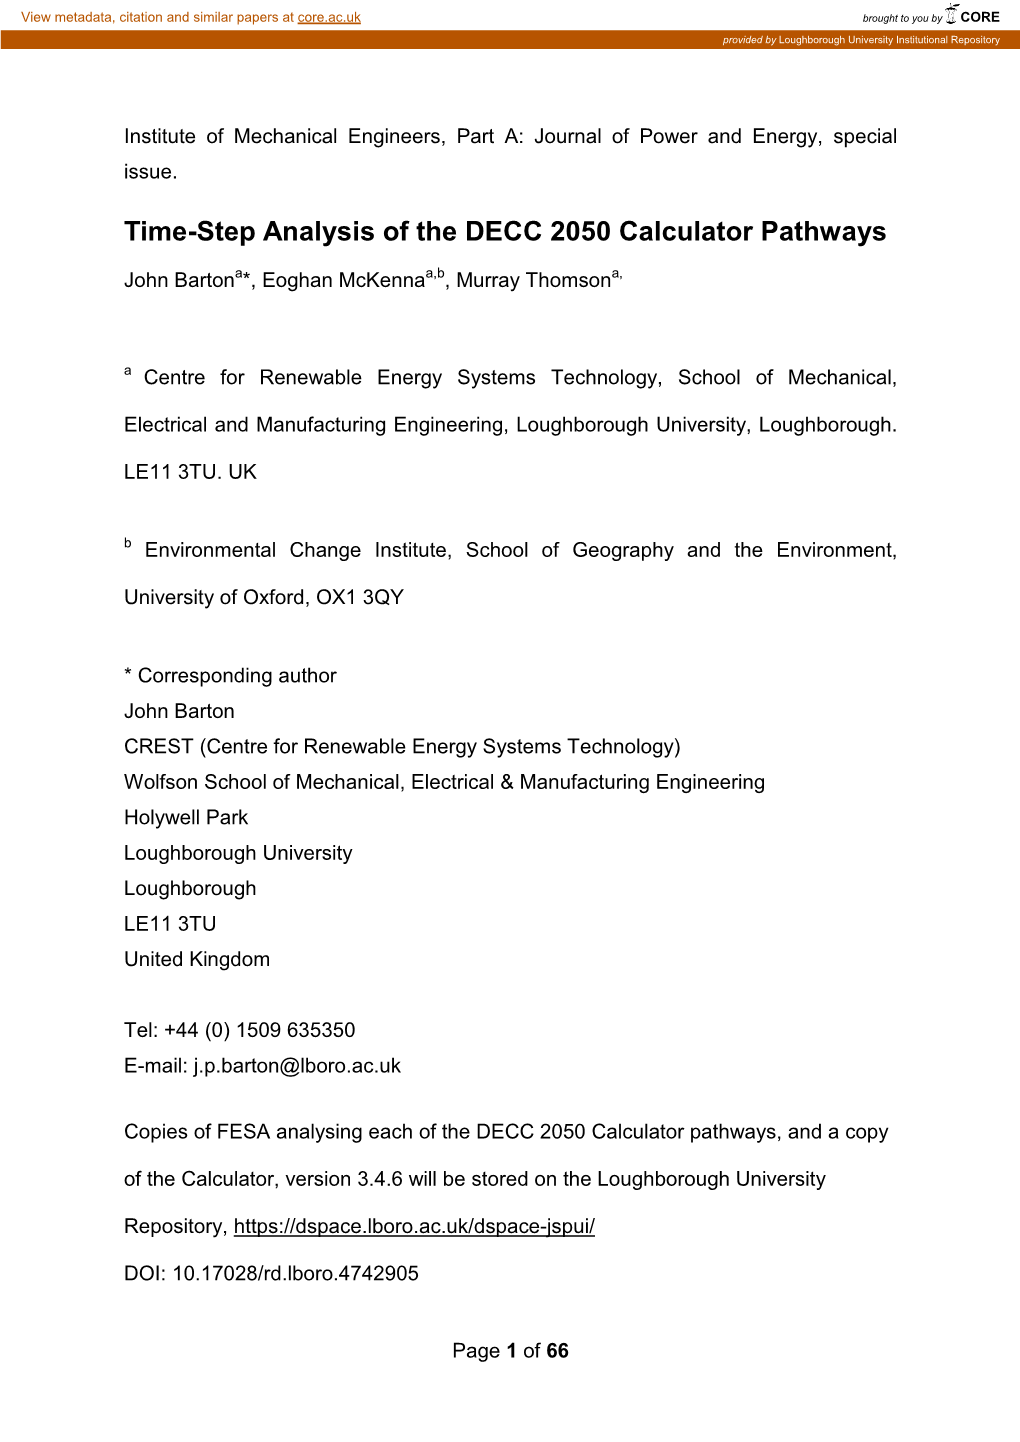 Time-Step Analysis of the DECC 2050 Calculator Pathways